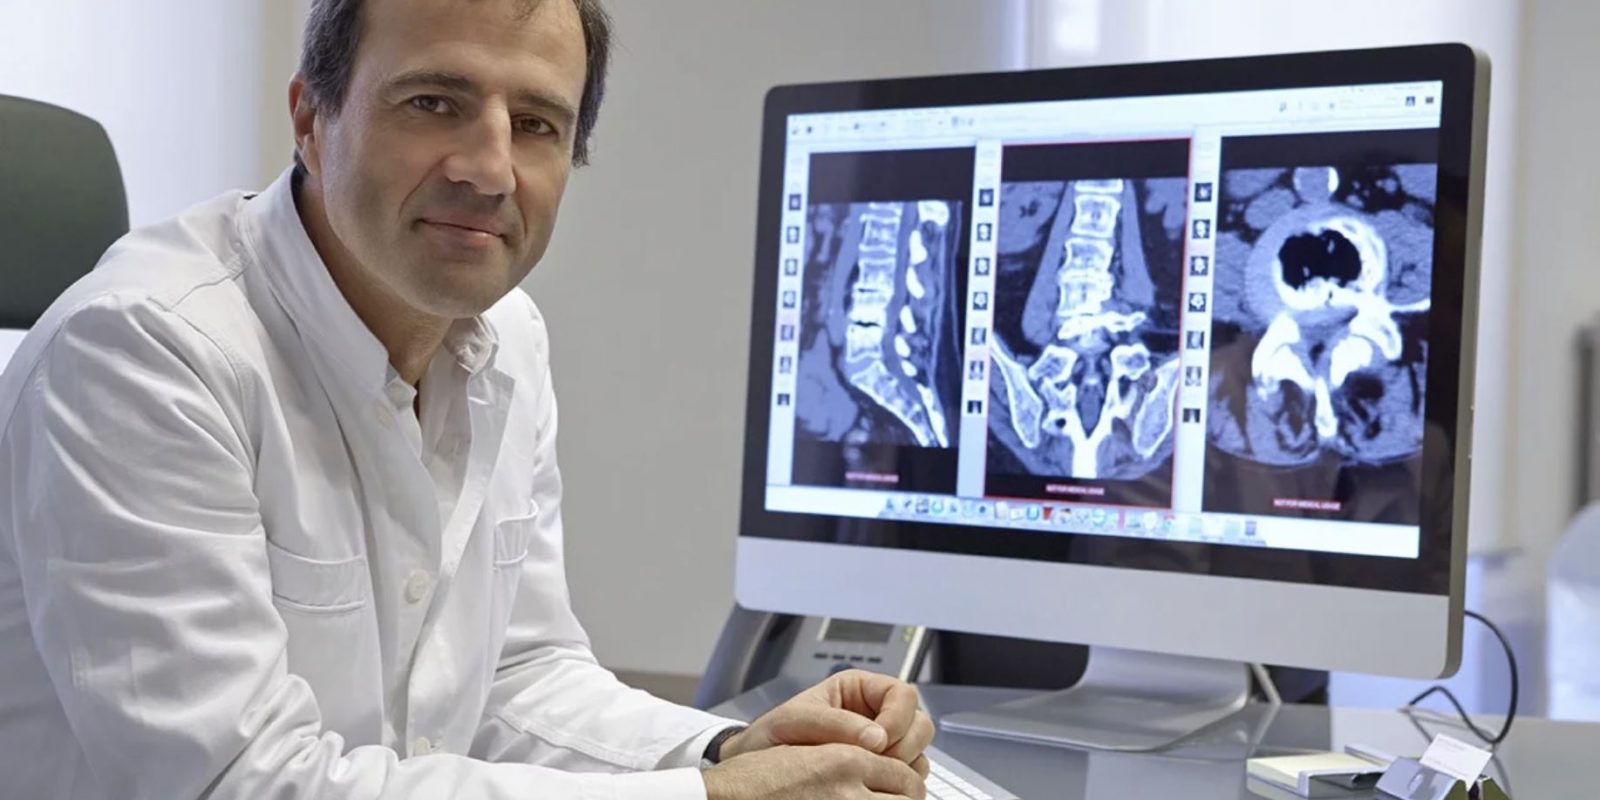 Meet the Expert! Dr. Berjano, Europe’s leading orthopedic spine surgeon believes in medical exercise therapy